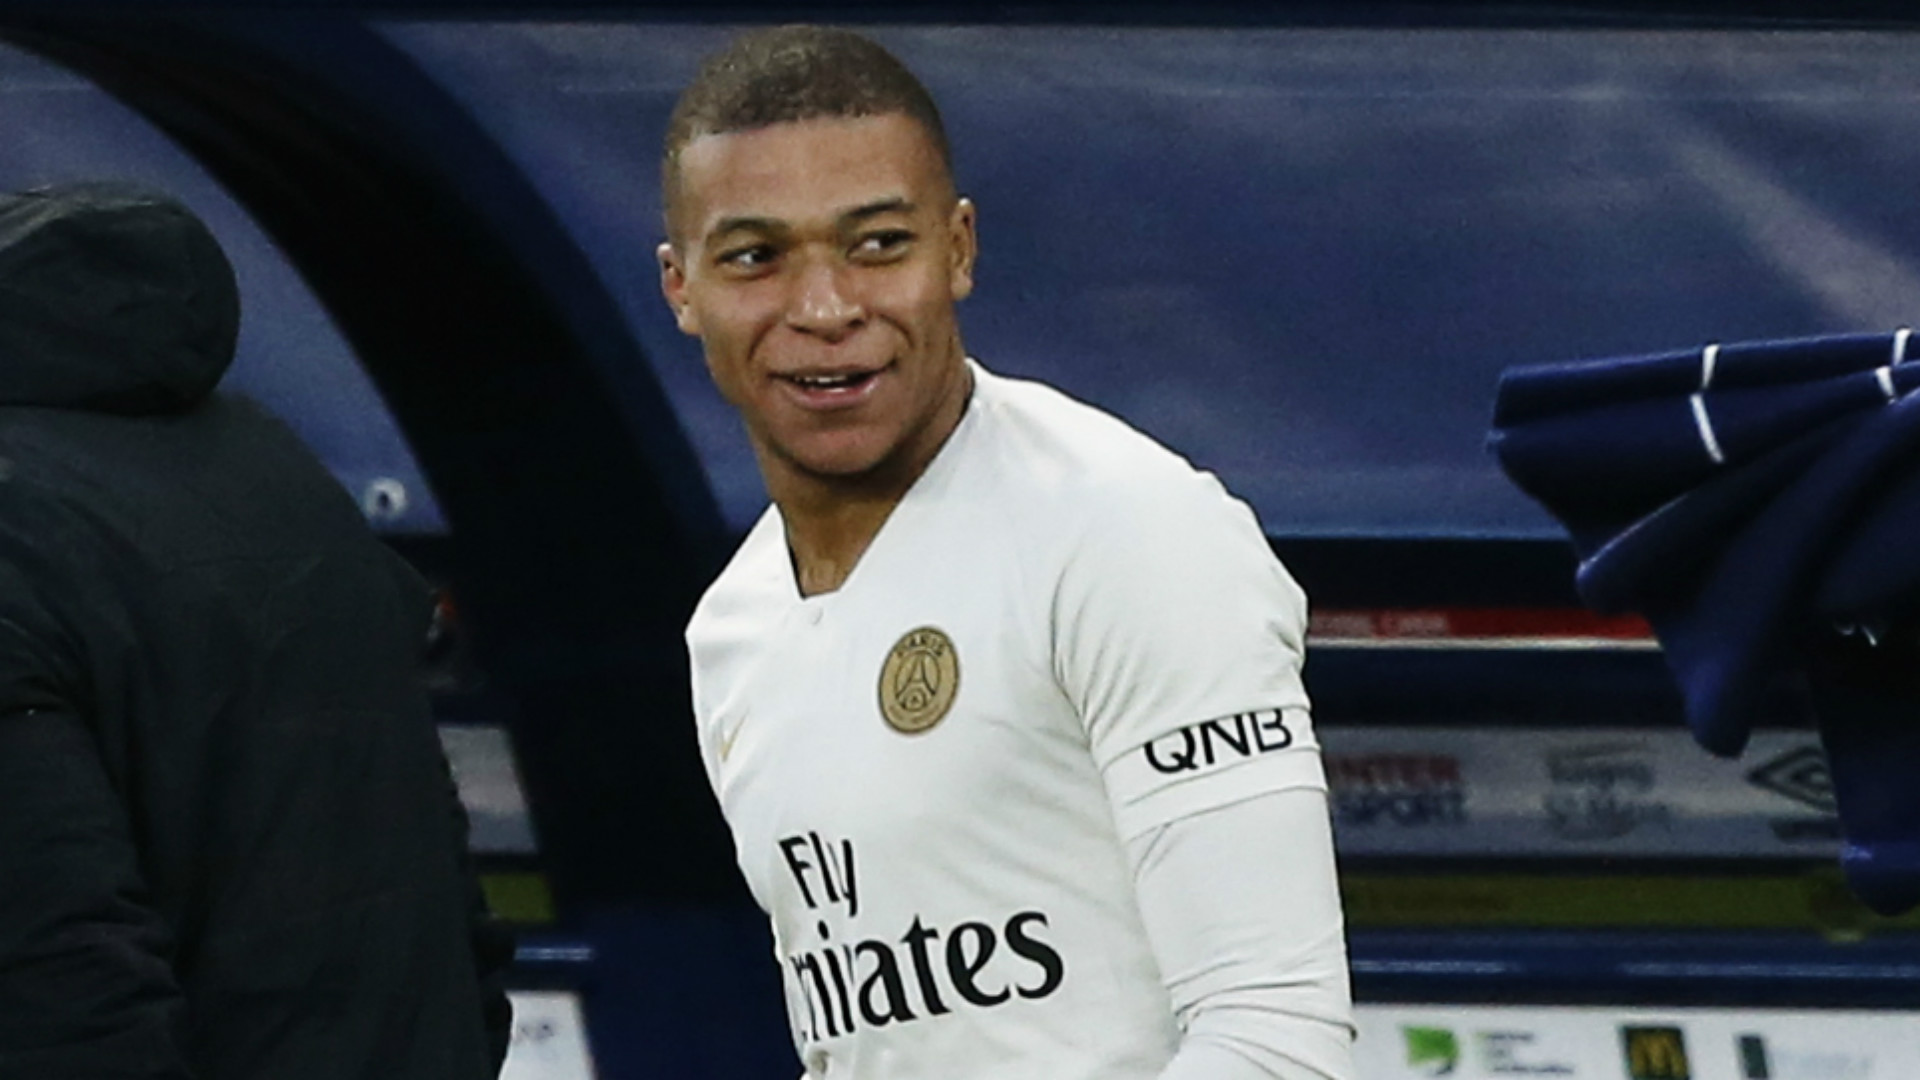 Transfer news and rumours LIVE: Real Madrid eye Mbappe as Bale replacement | Goal.com